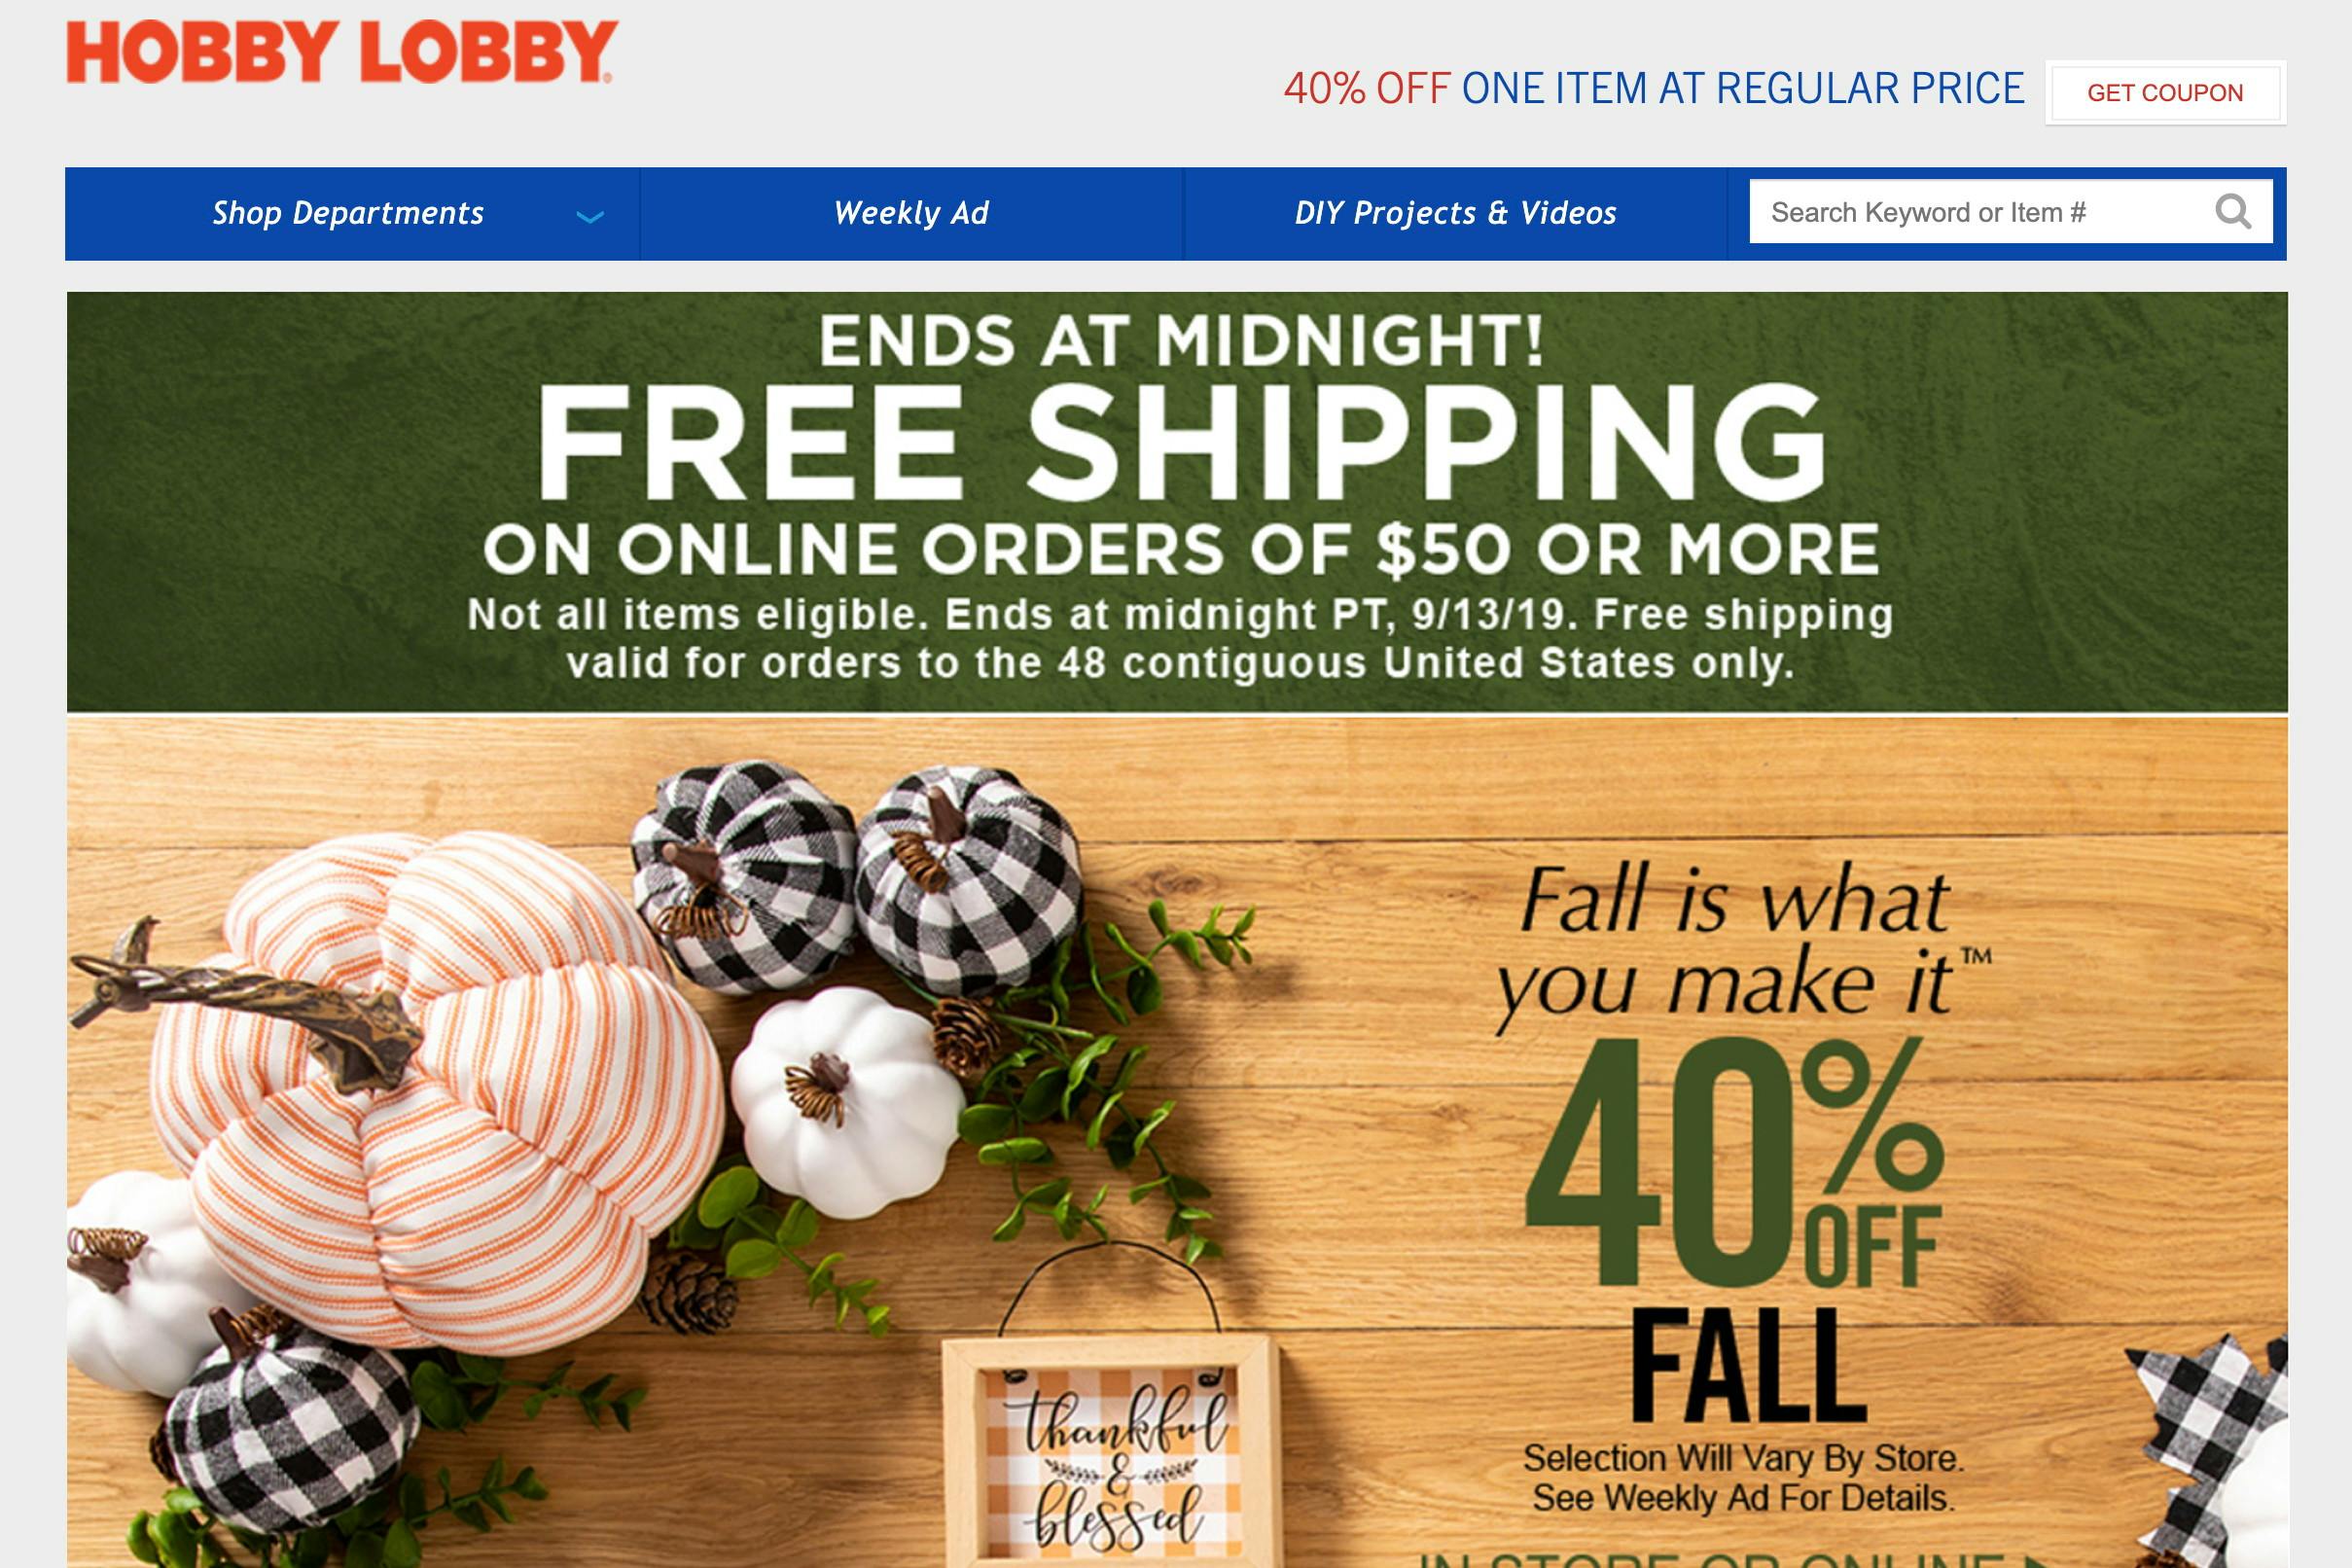 Use These Hobby Lobby Coupon Hacks To Save More Money The Krazy Coupon Lady